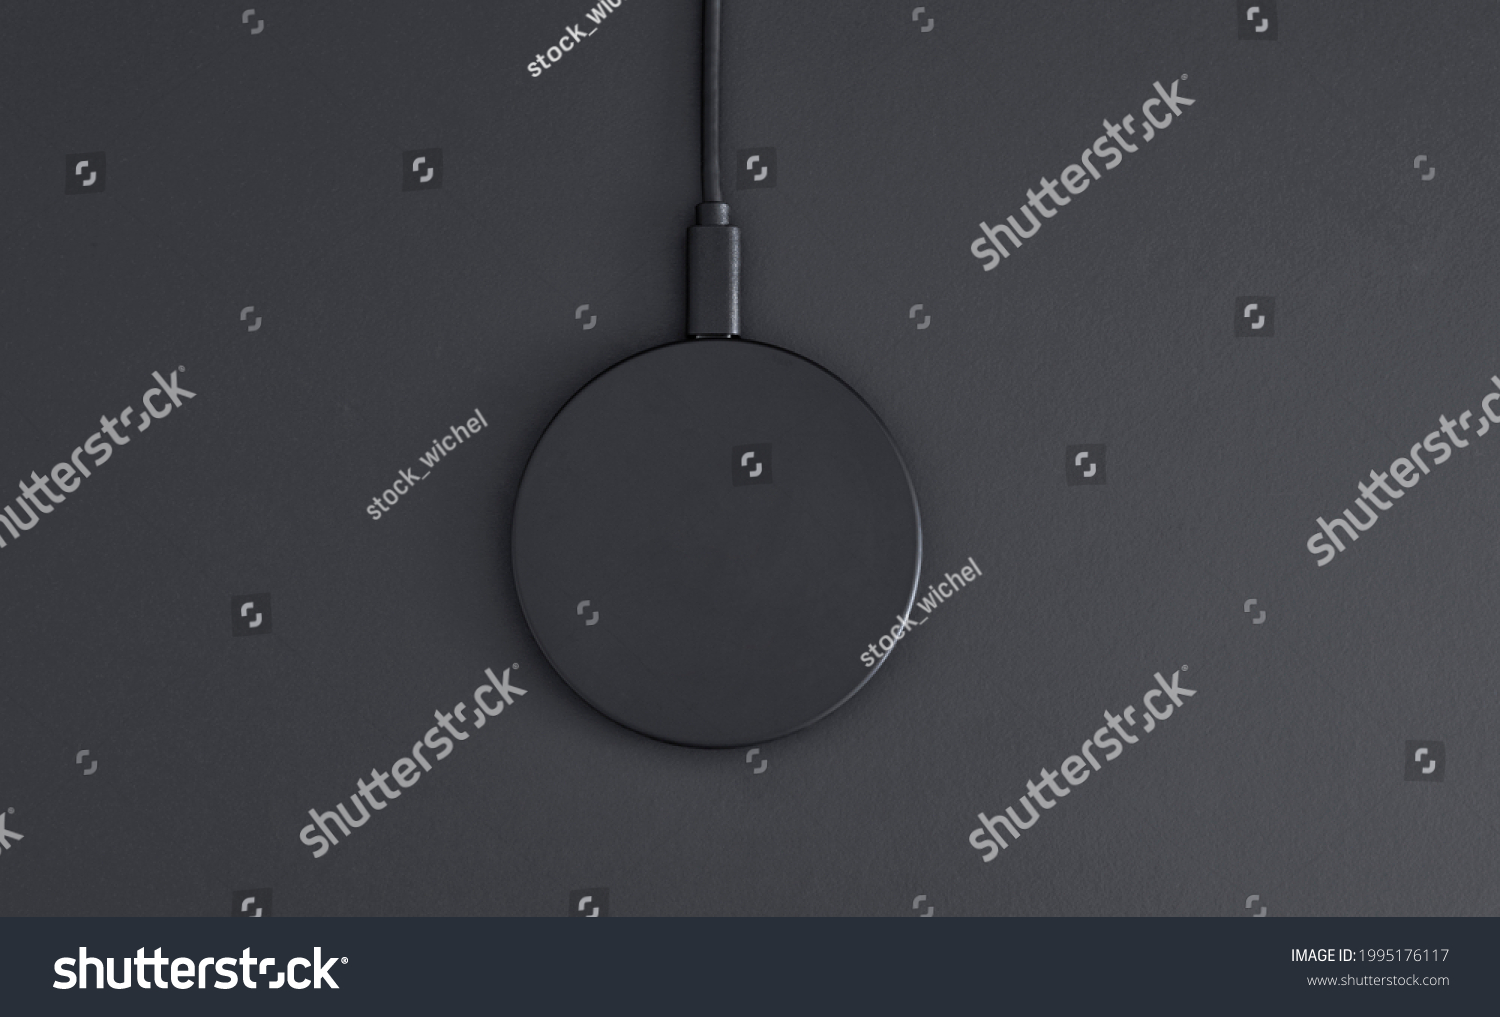 High angle view of black plastic circular wireless charger laying on dark grey desk. Modern technology, wireless device and transfer of energy concept. #1995176117